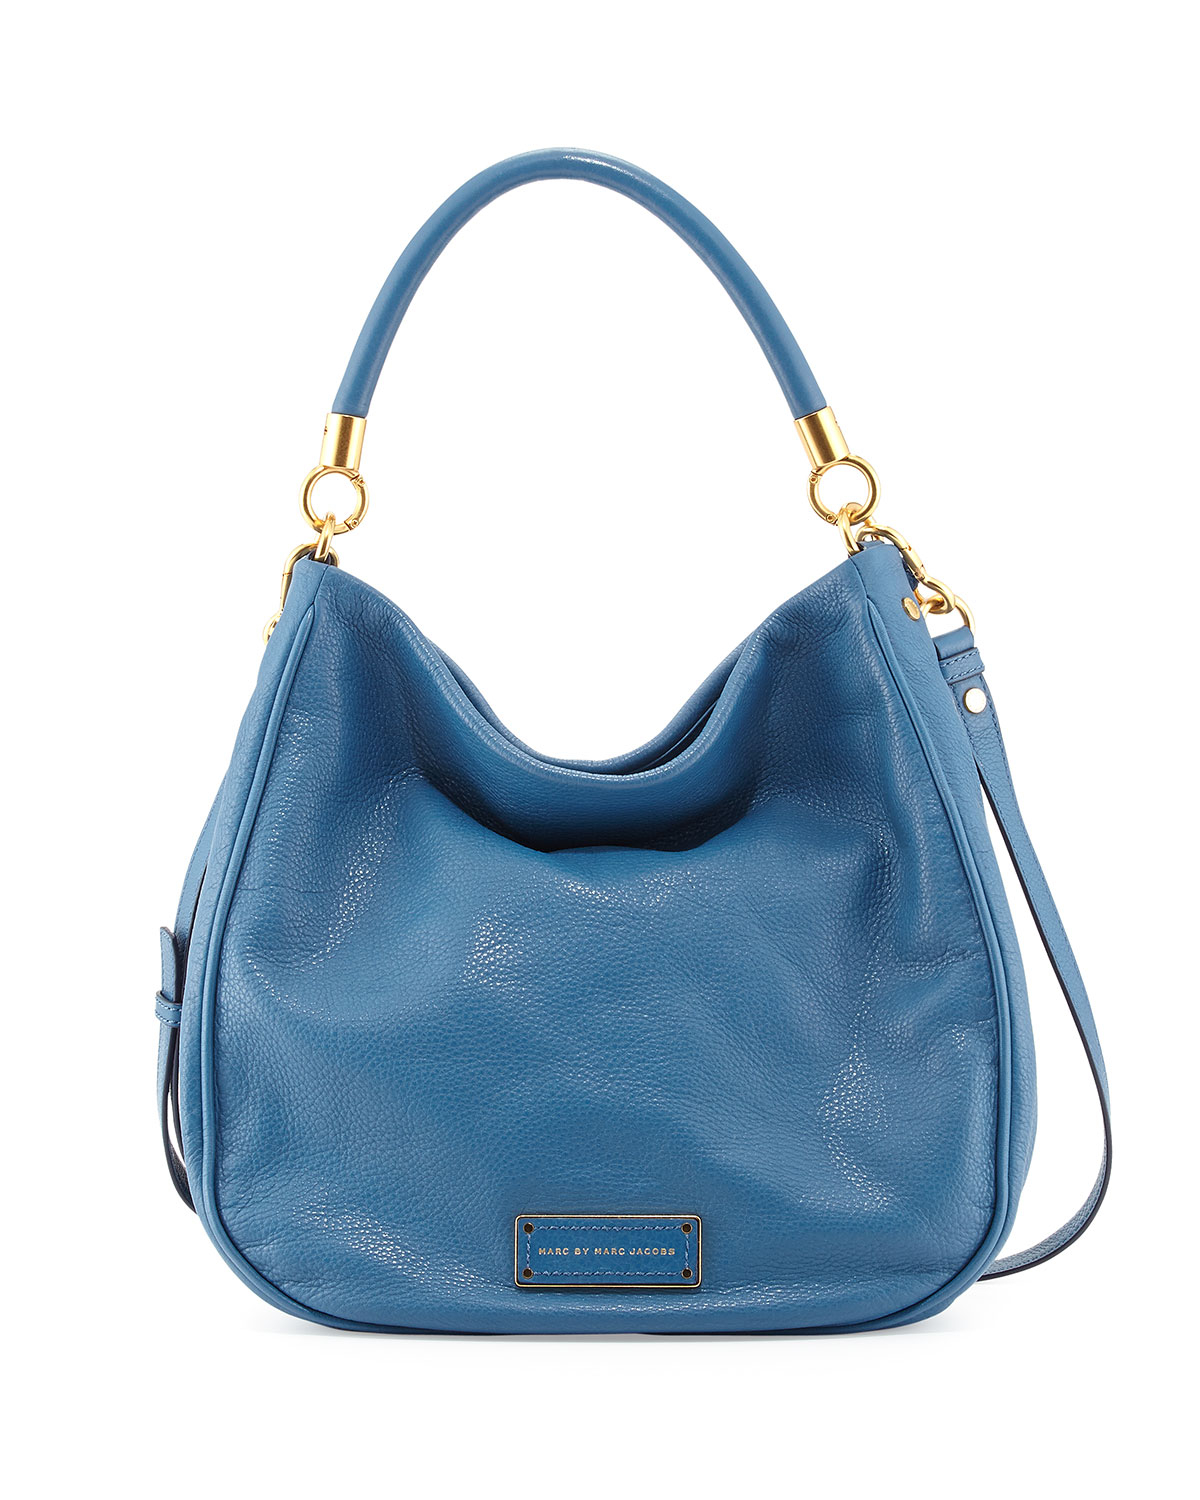 Marc by marc jacobs Too Hot To Handle Hobo Bag in Blue (BLUESTONE) | Lyst